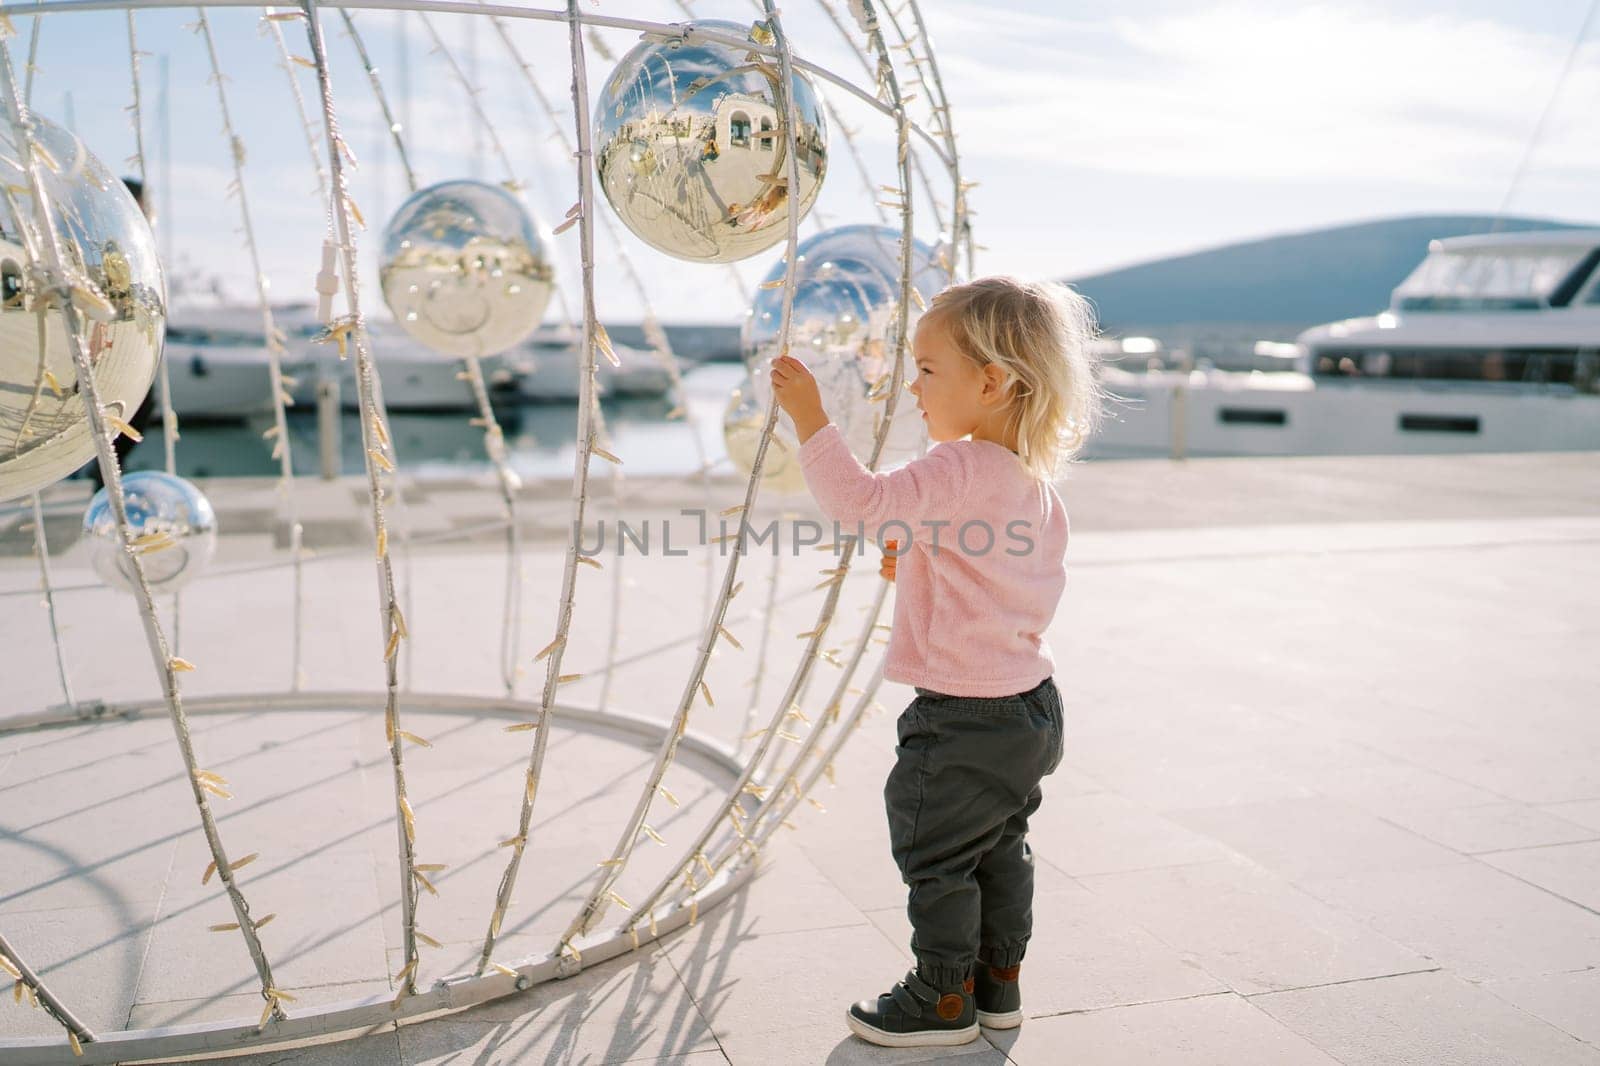 Little girl stands near a spherical Christmas installation with mirror balls. High quality photo